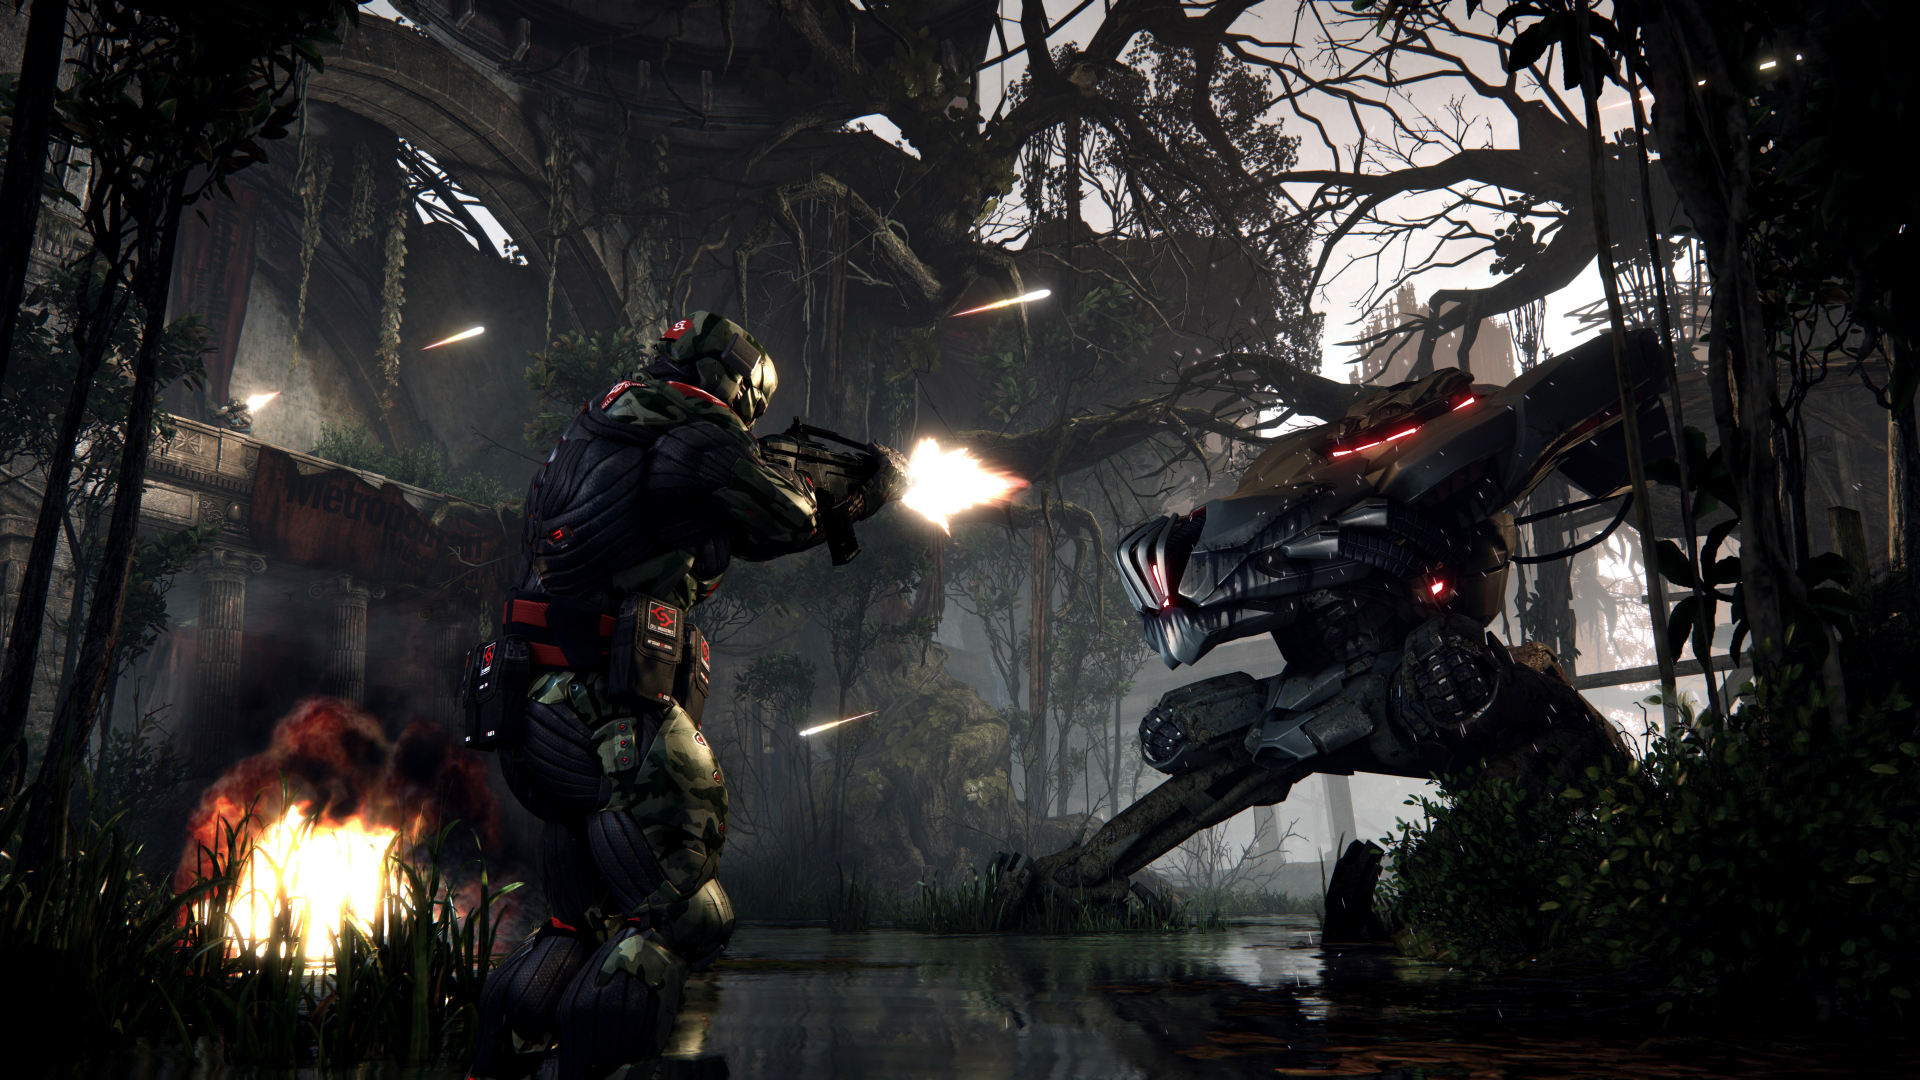 Media asset in full size related to 3dfxzone.it news item entitled as follows: In un game la grafica conta pi del gameplay: se lo dice Crytek... | Image Name: news19342_Crysis-3_1.png